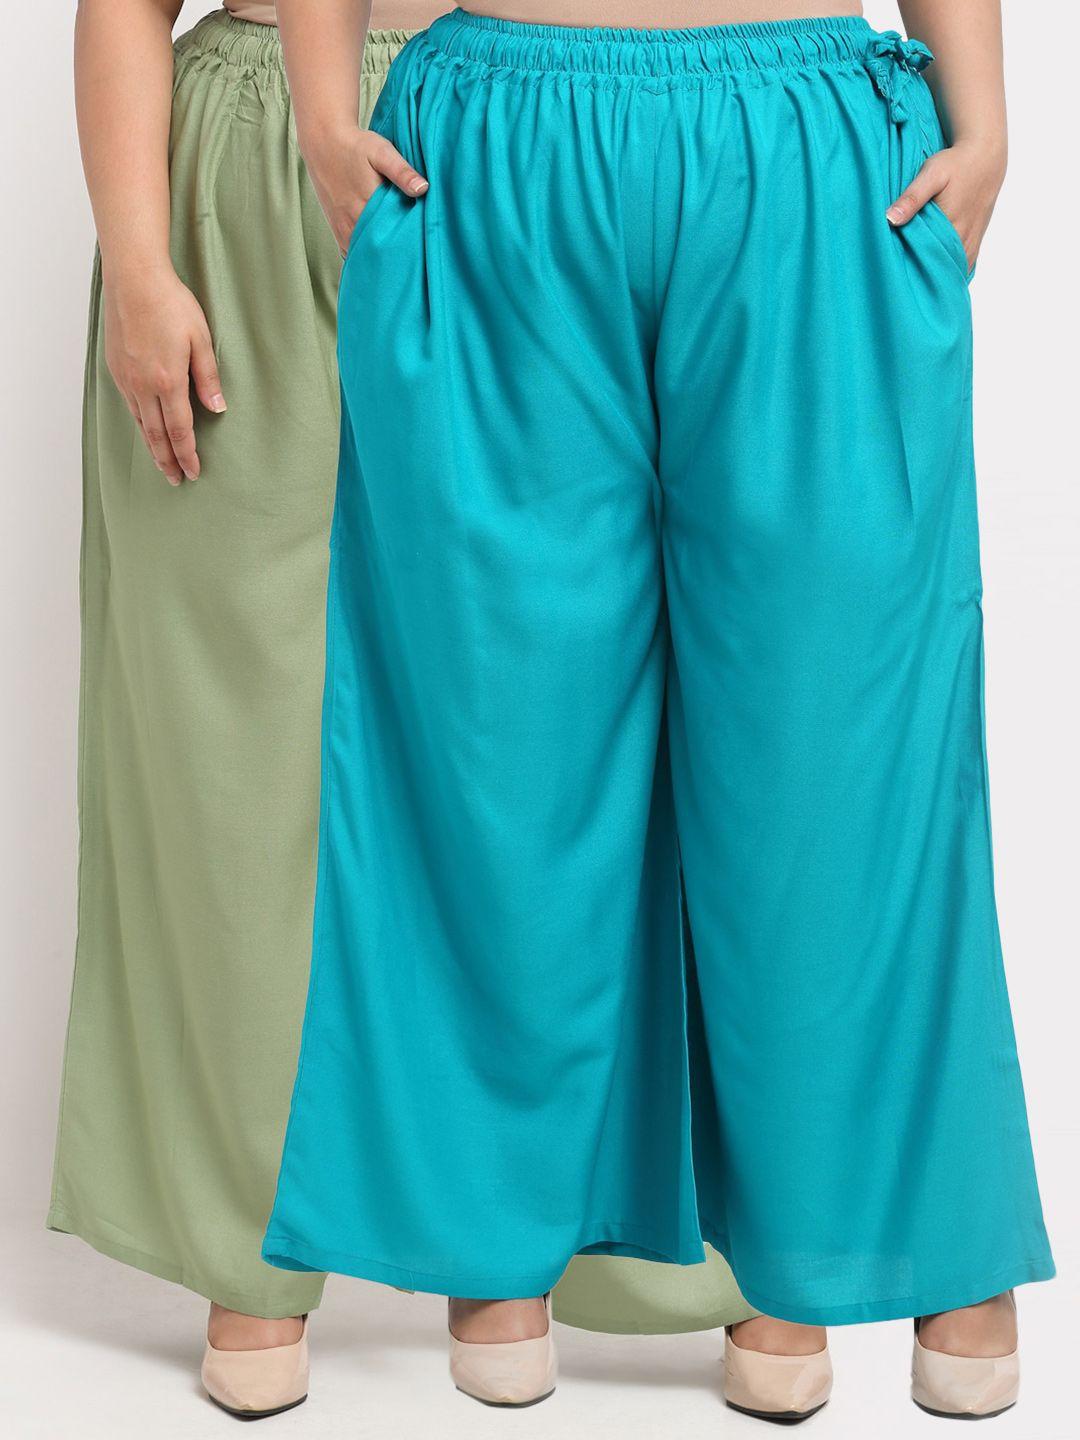 tag 7 plus women green & blue pack of 2 ethnic palazzos